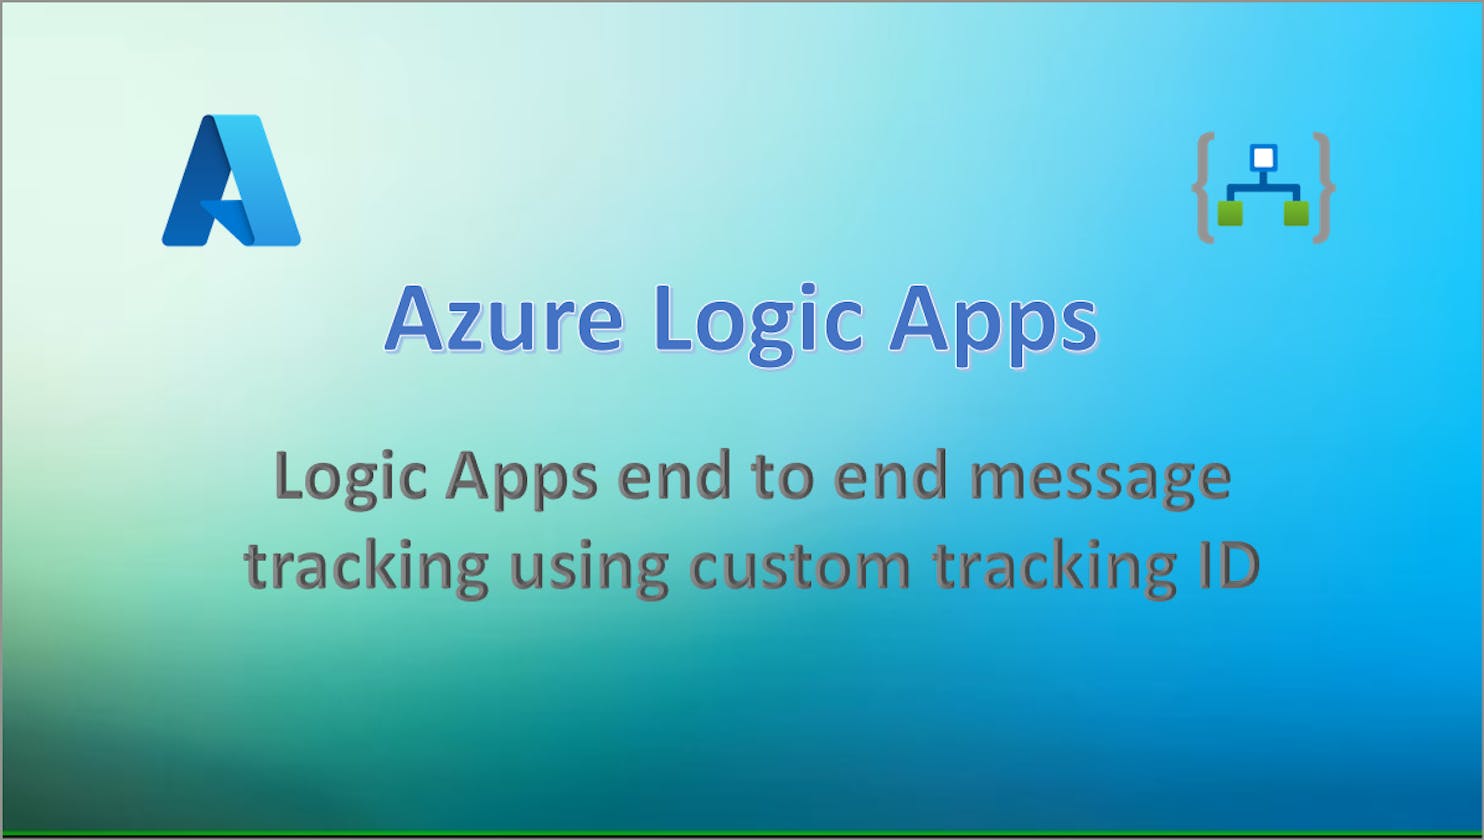 Azure Logic Apps end to end message tracking using custom tracking ID